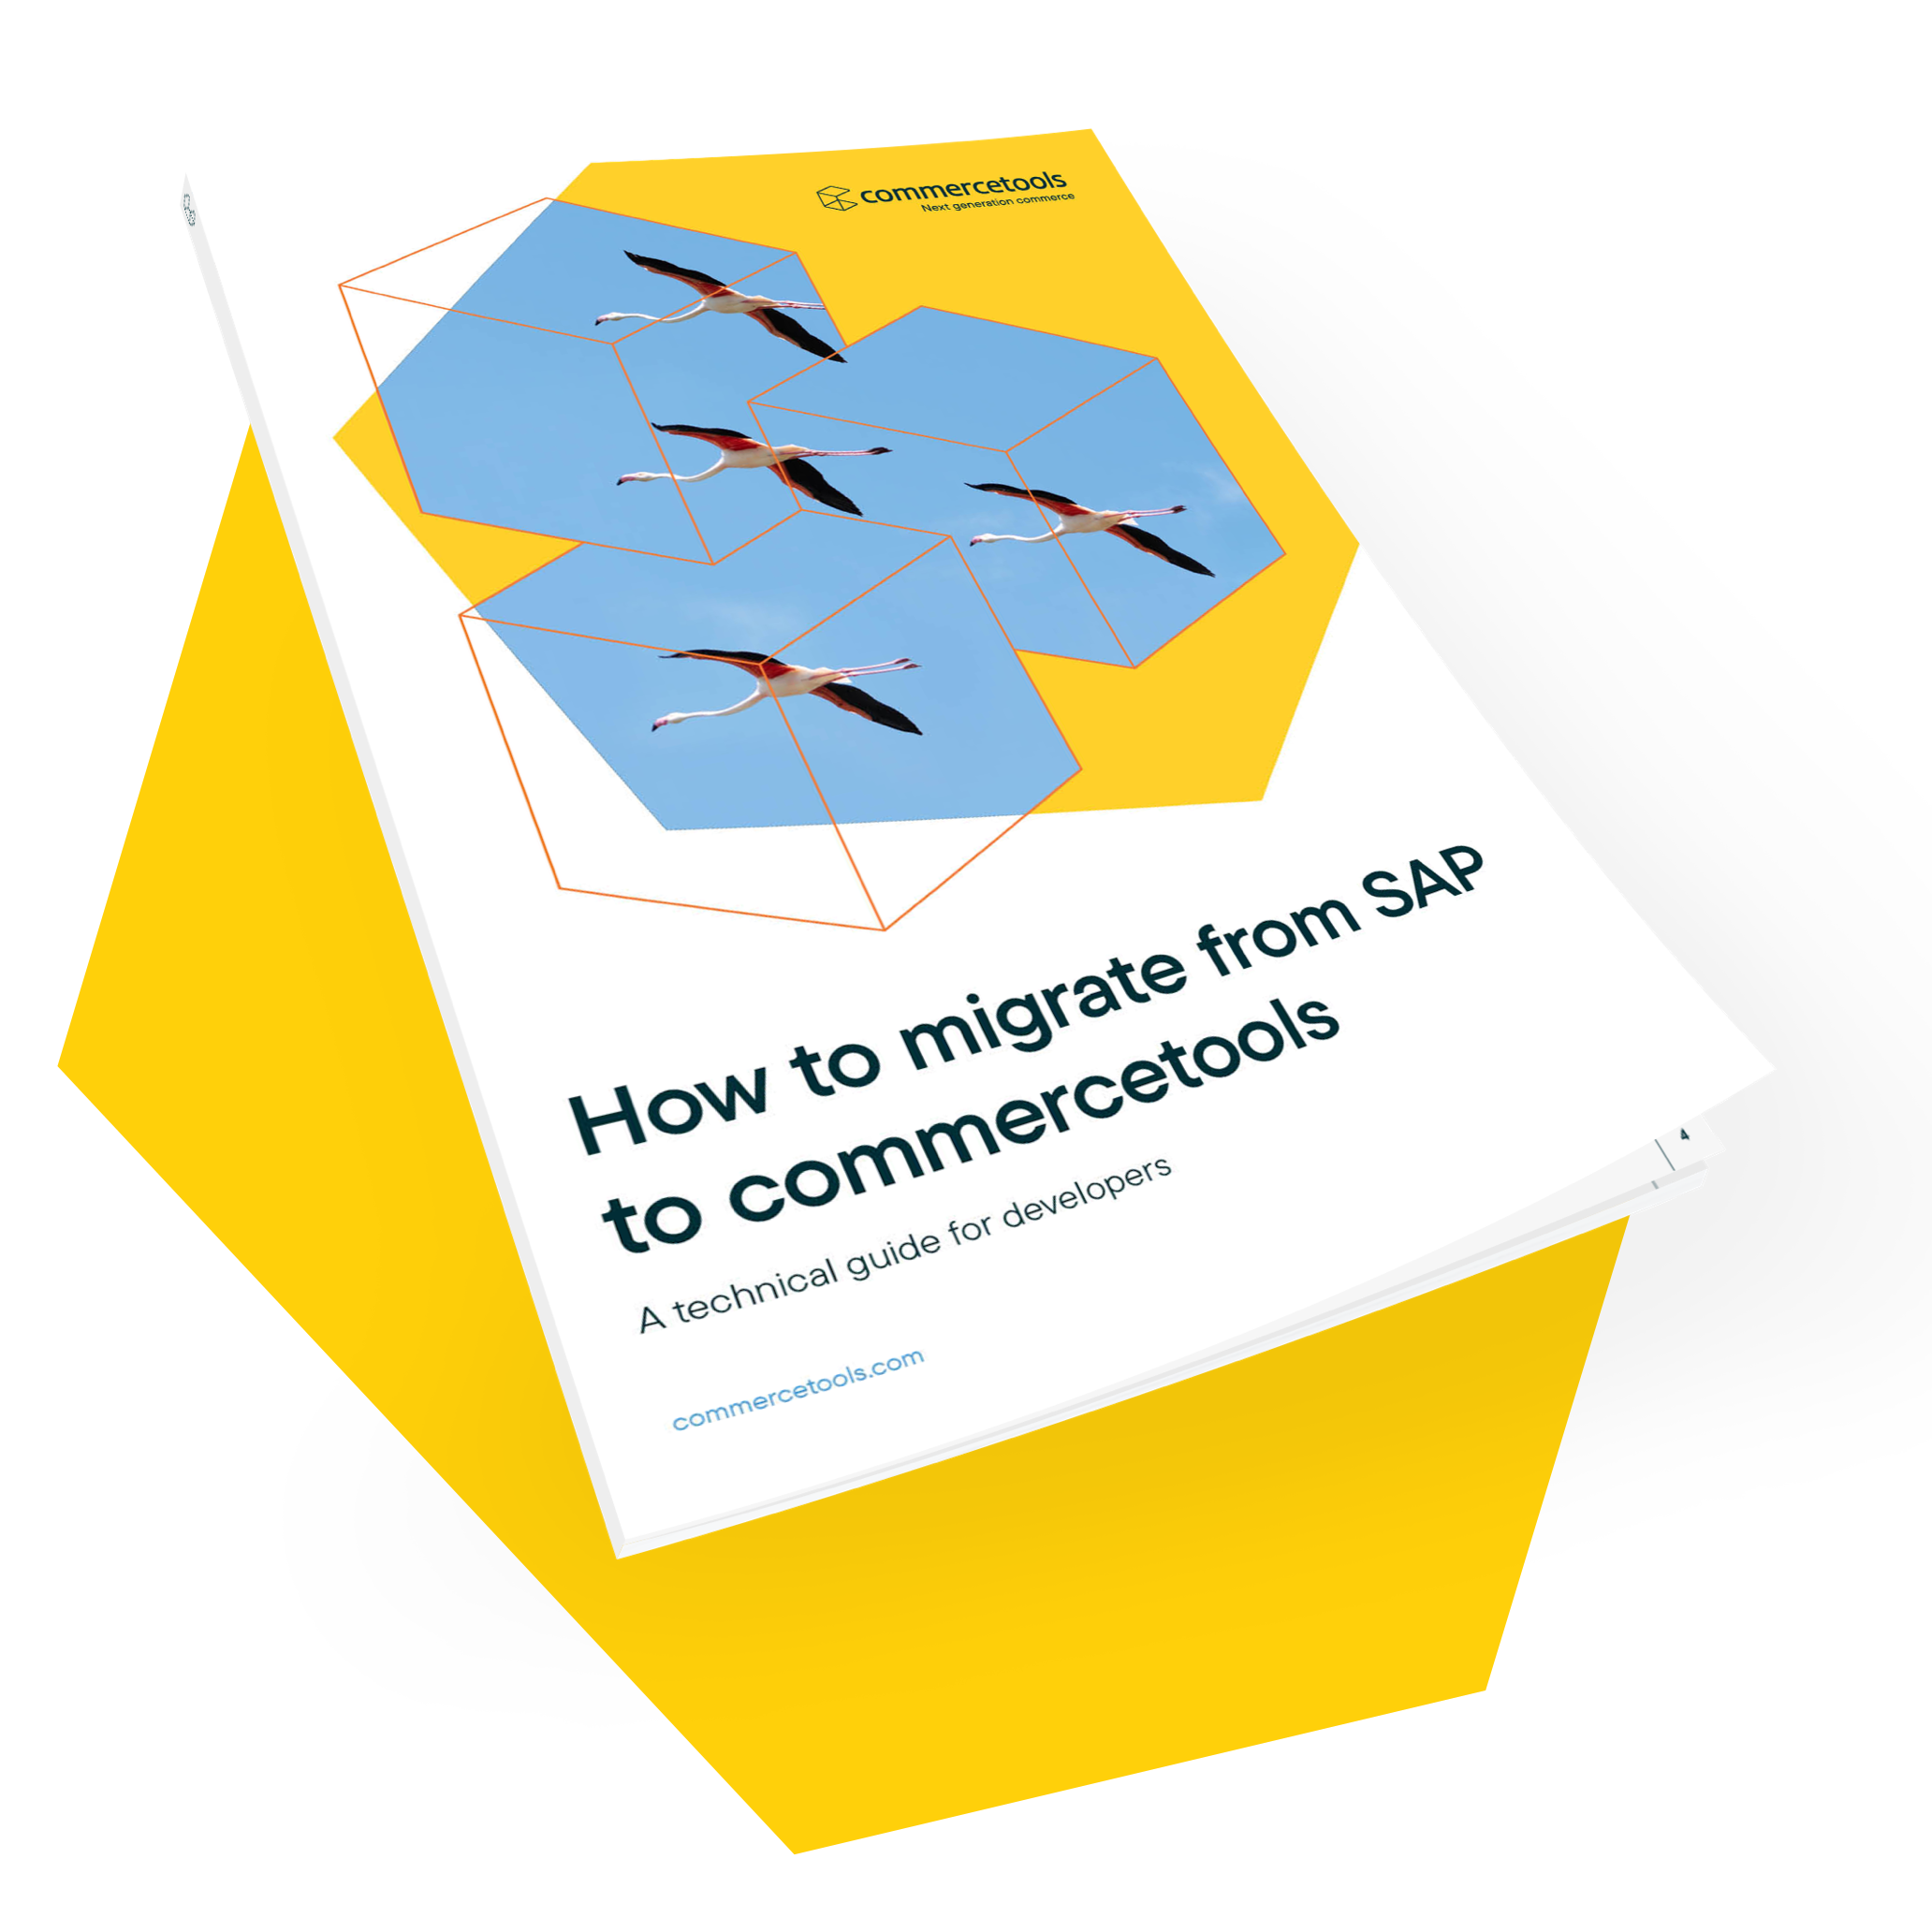 How to migrate from SAP to commercetools WhitePaper